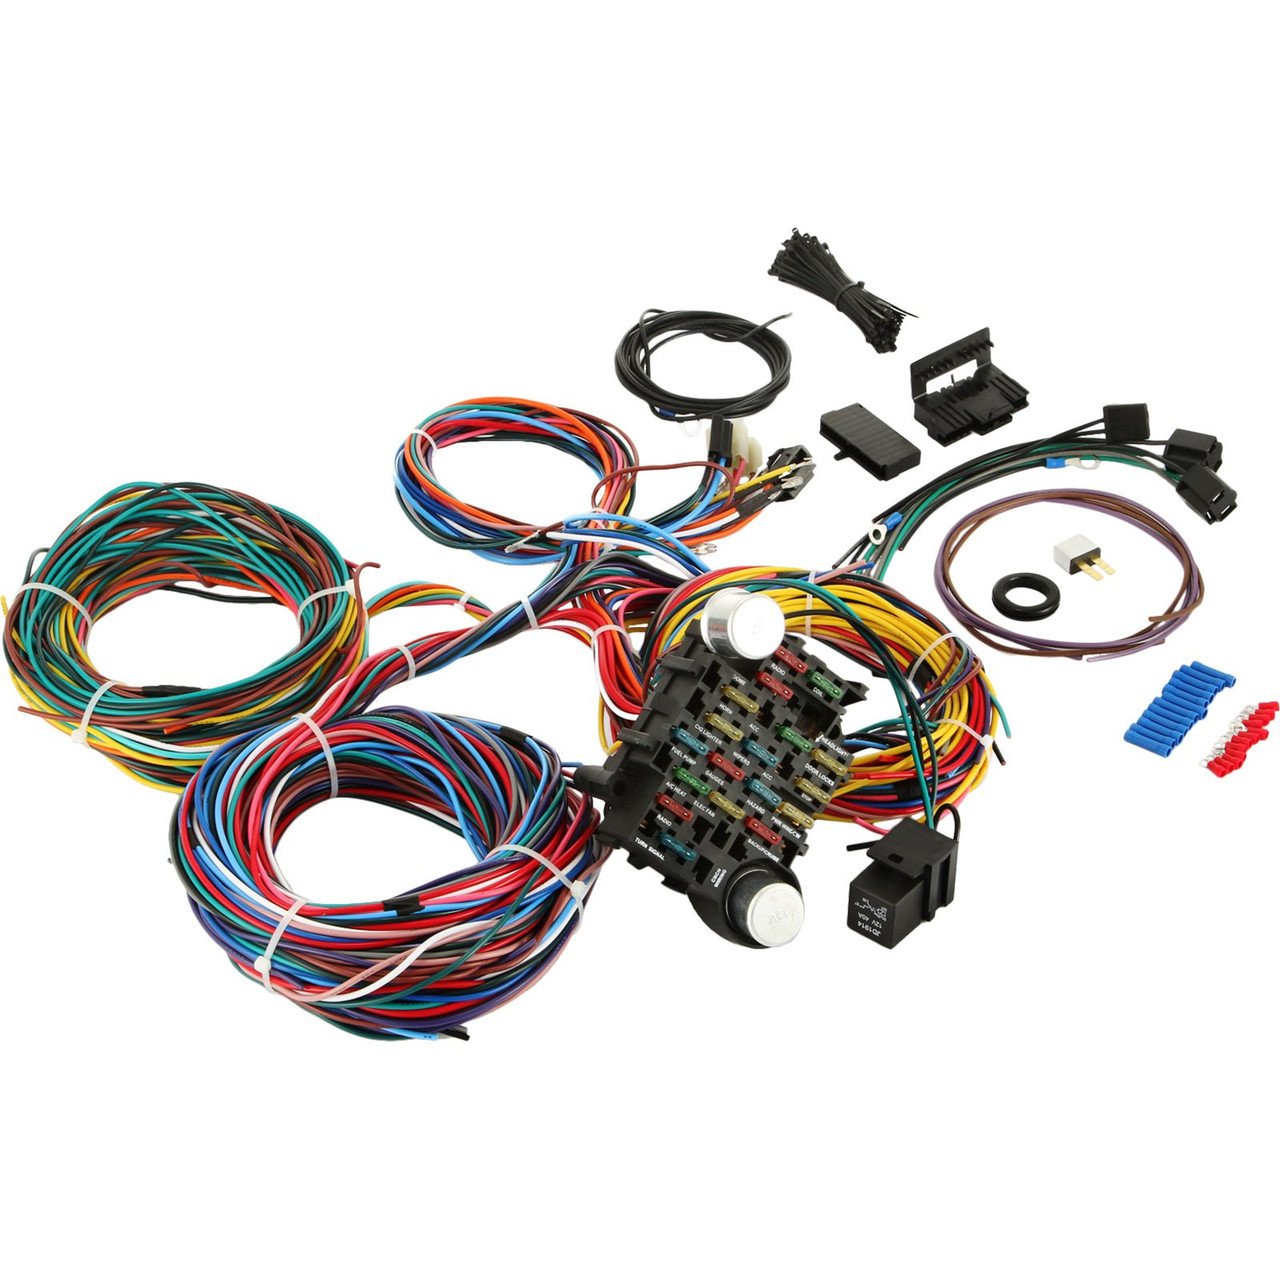 21 Circuit Wiring Harness Kit Long Wires Wiring Harness 21 standard Color Wiring Harness Kit with 21 Circuits 17 Fuses for Chevy Mopar Hotrods Ford Chrysler Universal